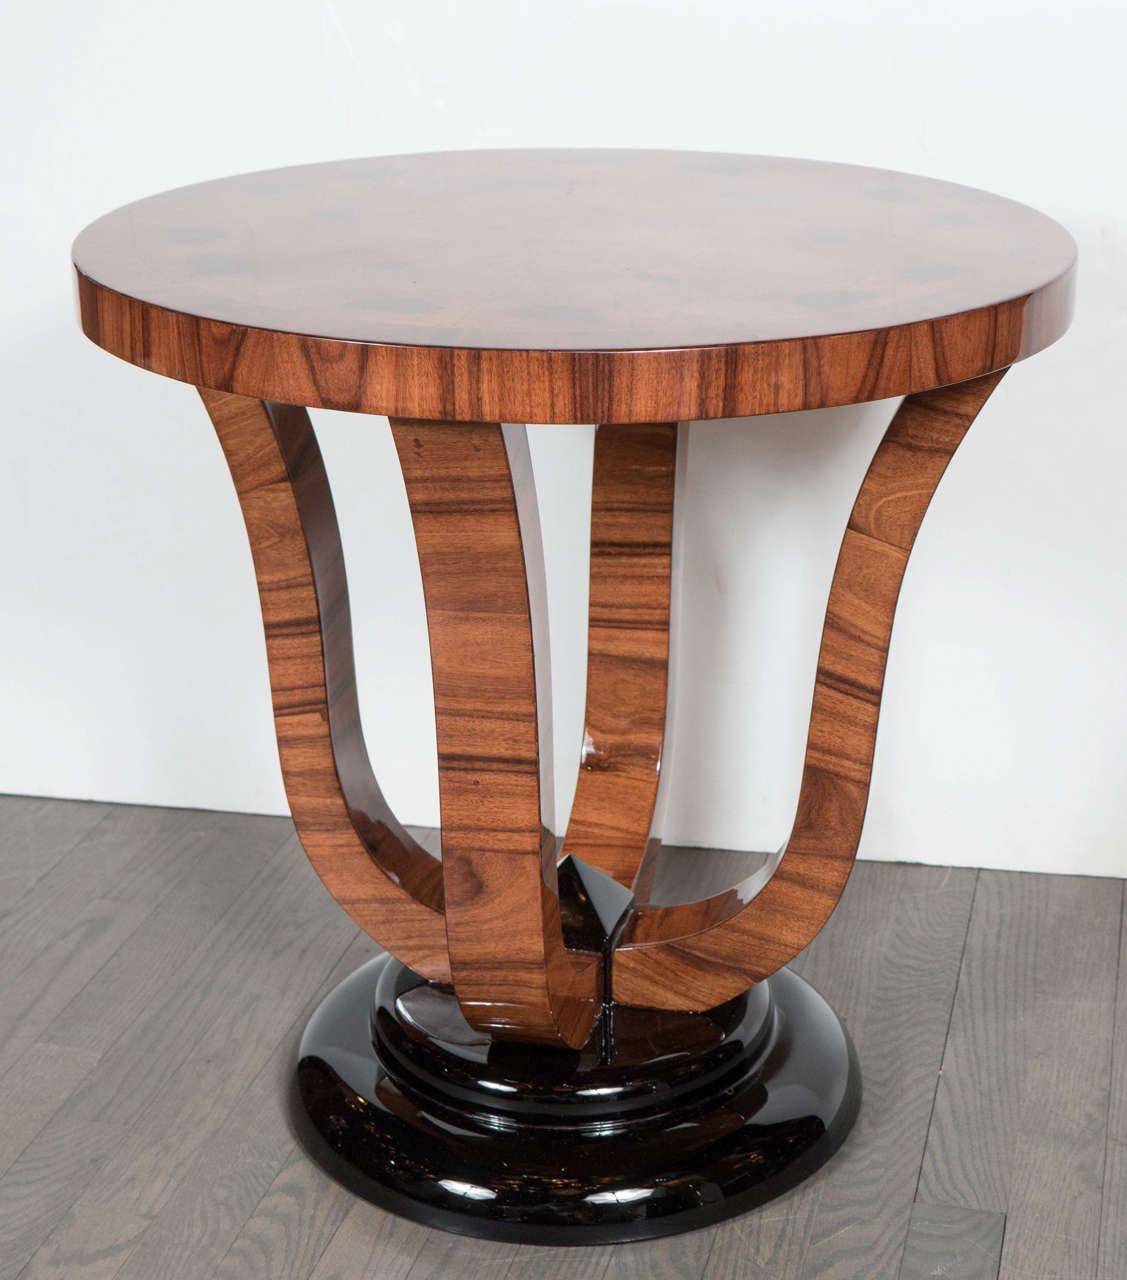 This incredible Art Deco gueridon table is truly exquisite. It features a beautiful design of book matched burled carpathian elm in a pie design with a surround of exotic walnut and supporting legs. It also features an Art Deco black lacquered